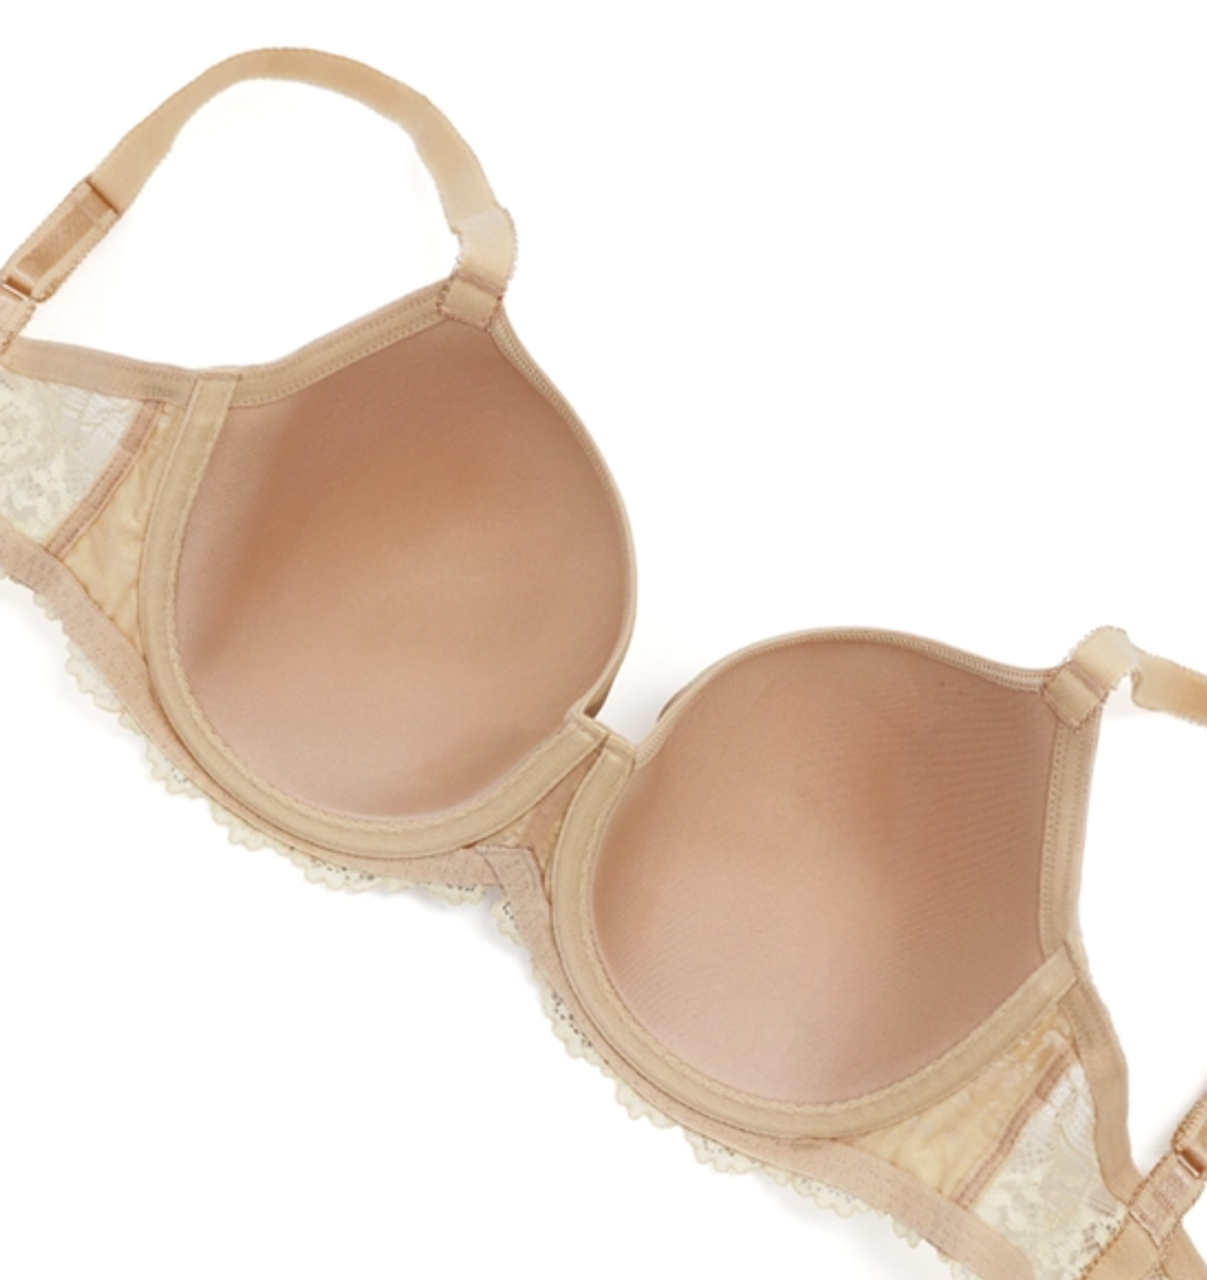 Wacoal Embrace Lace Petite Padded Push Up Bra in Natural Nude